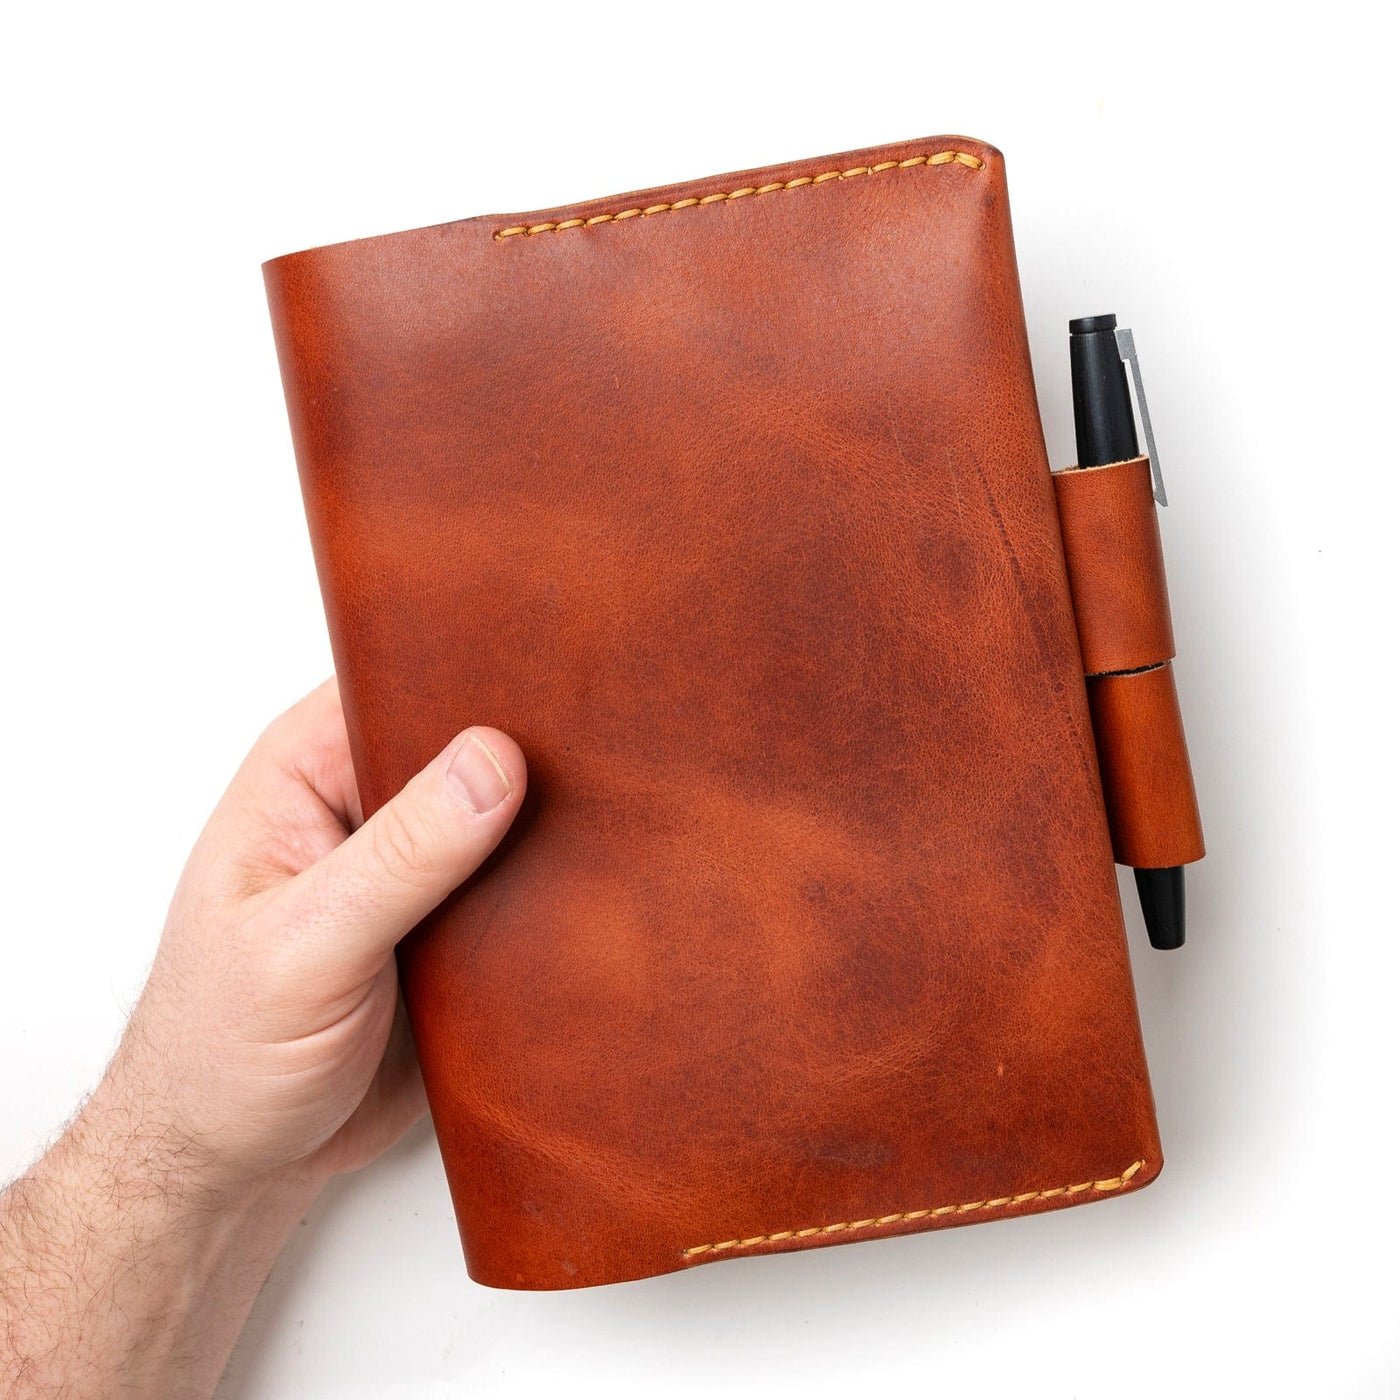 Leather Leuchtturm1917 A5 Notebook Cover - English Tan Popov Leather